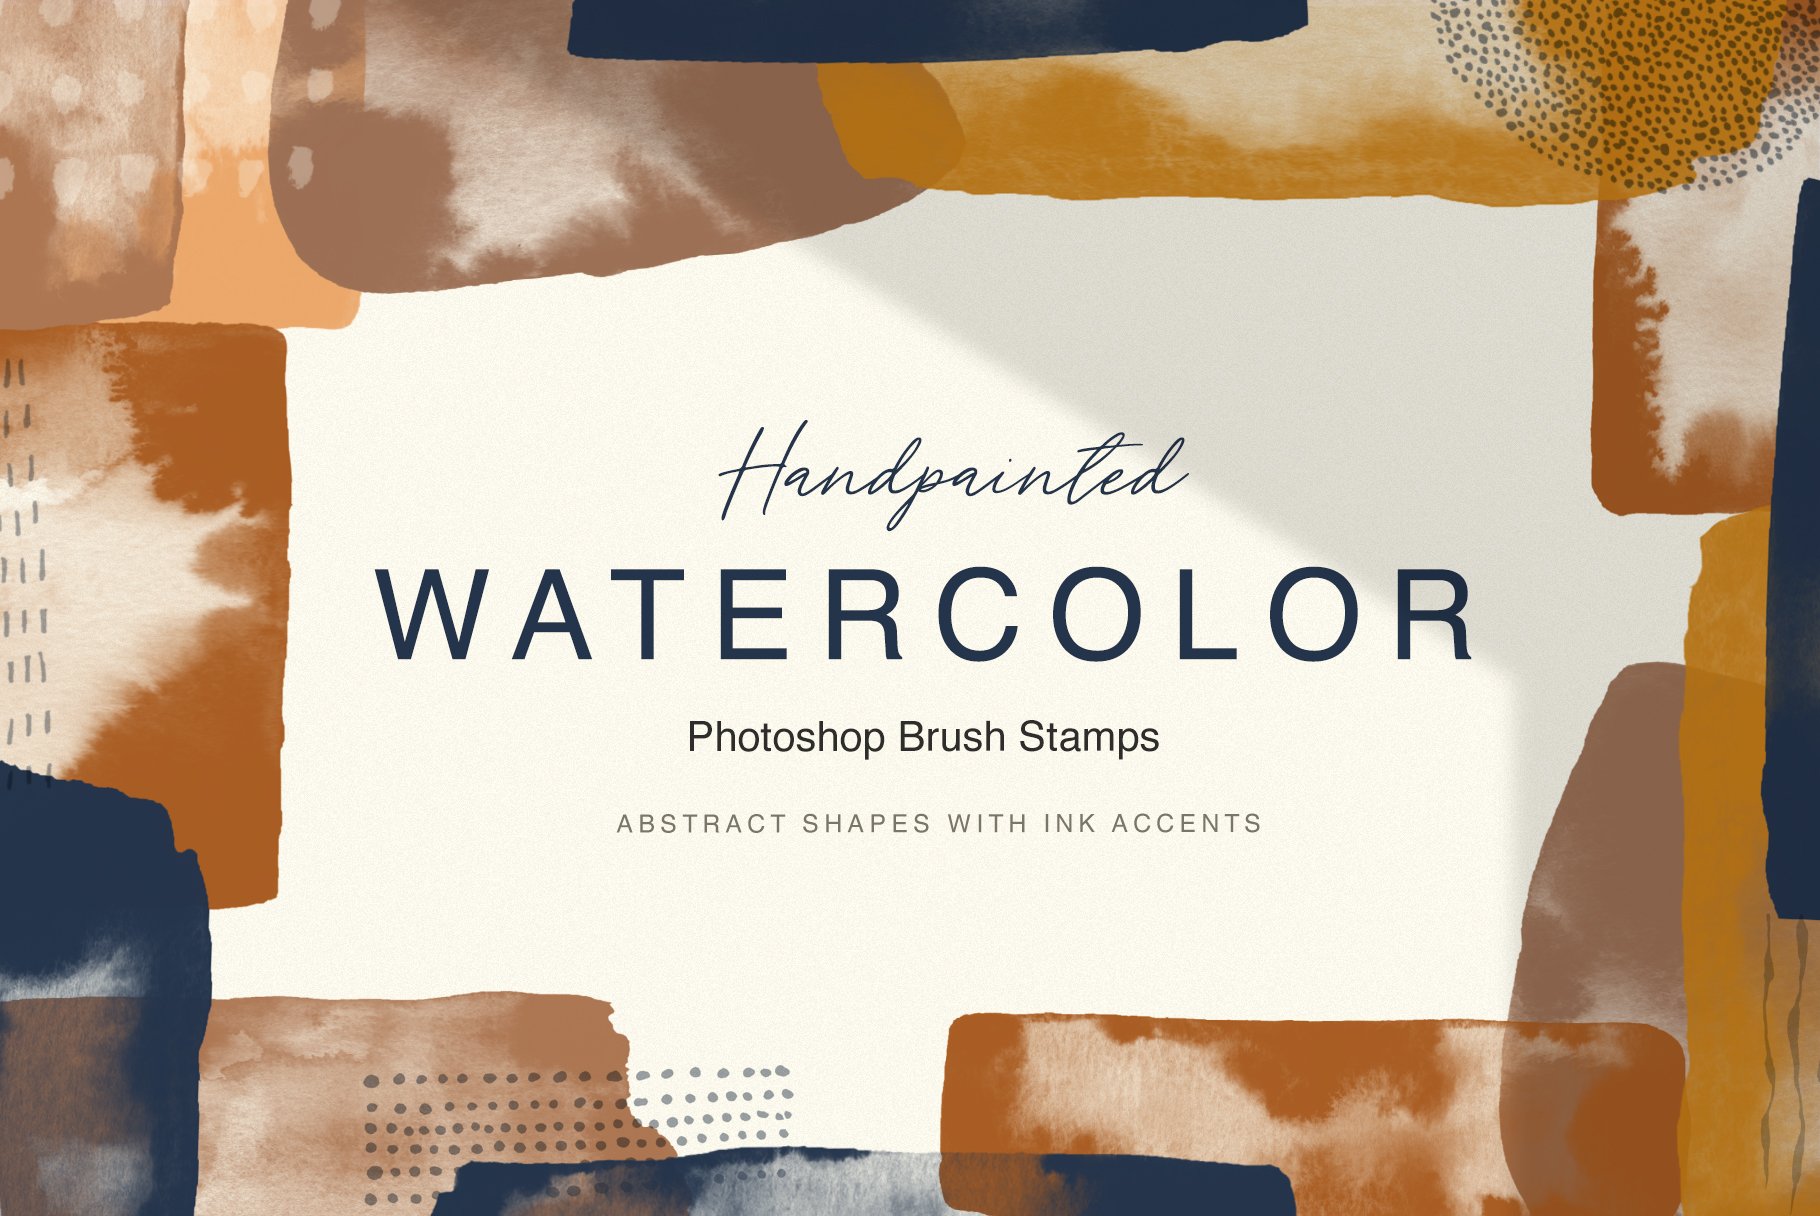 Watercolor Photoshop Shape Stampscover image.